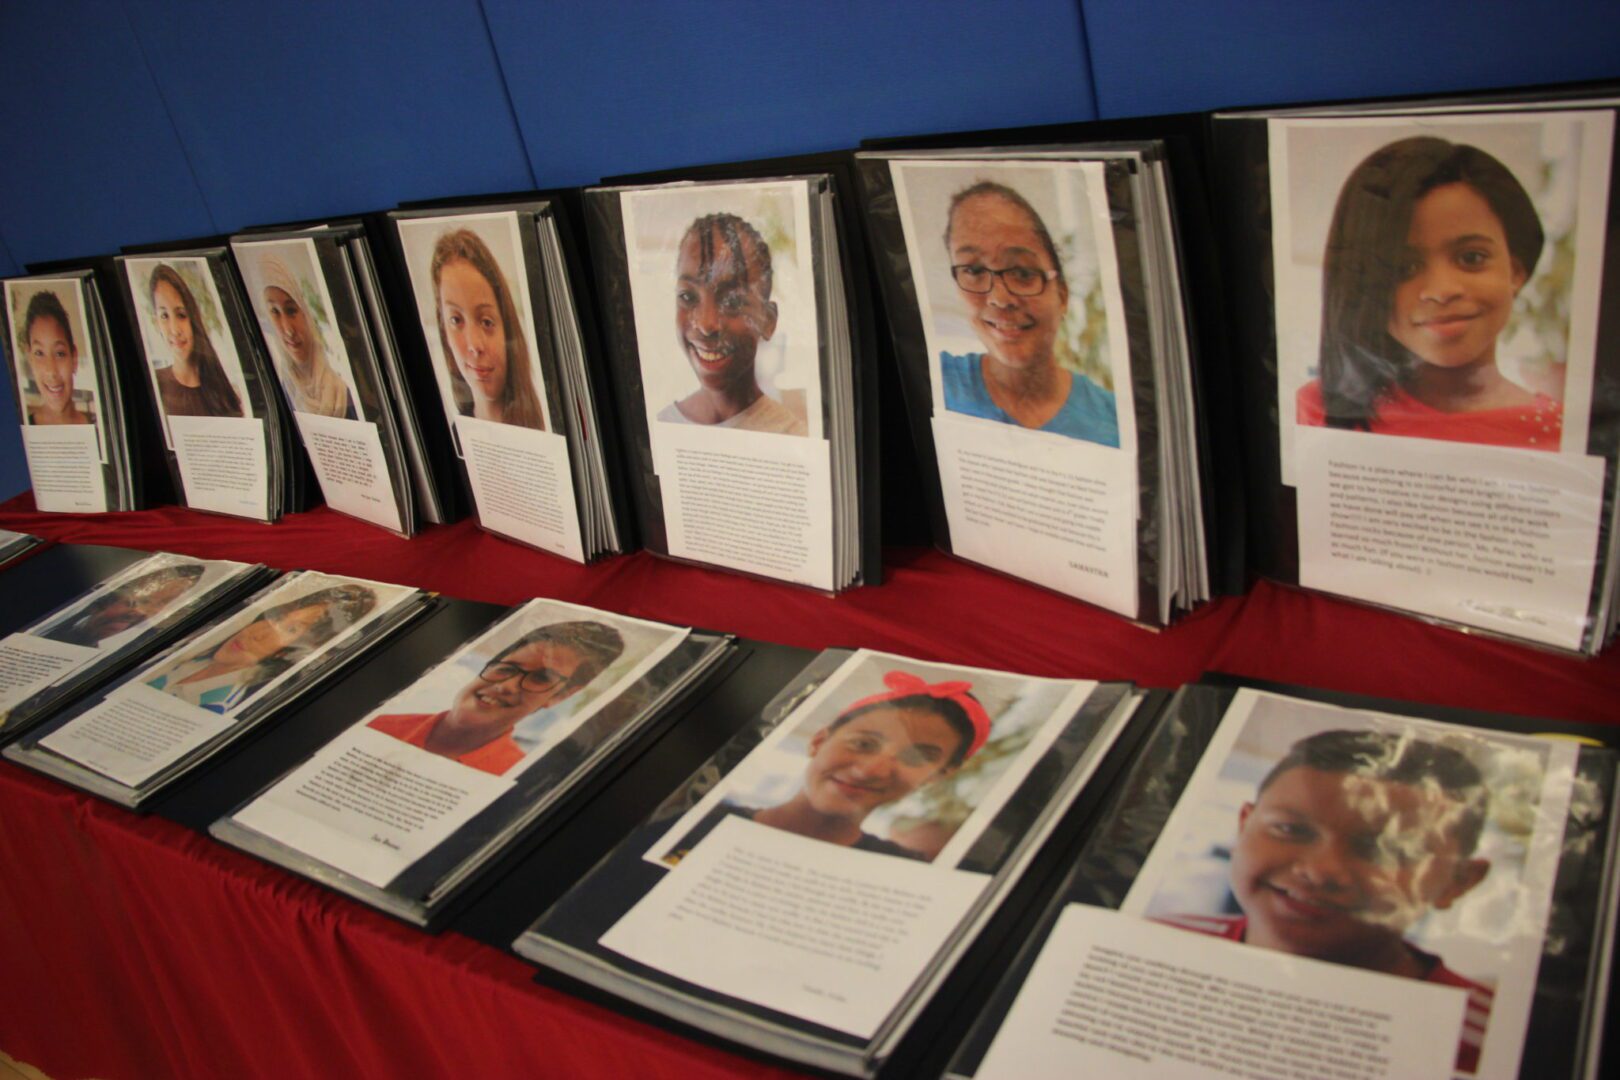 A display of photos of young people on a table.